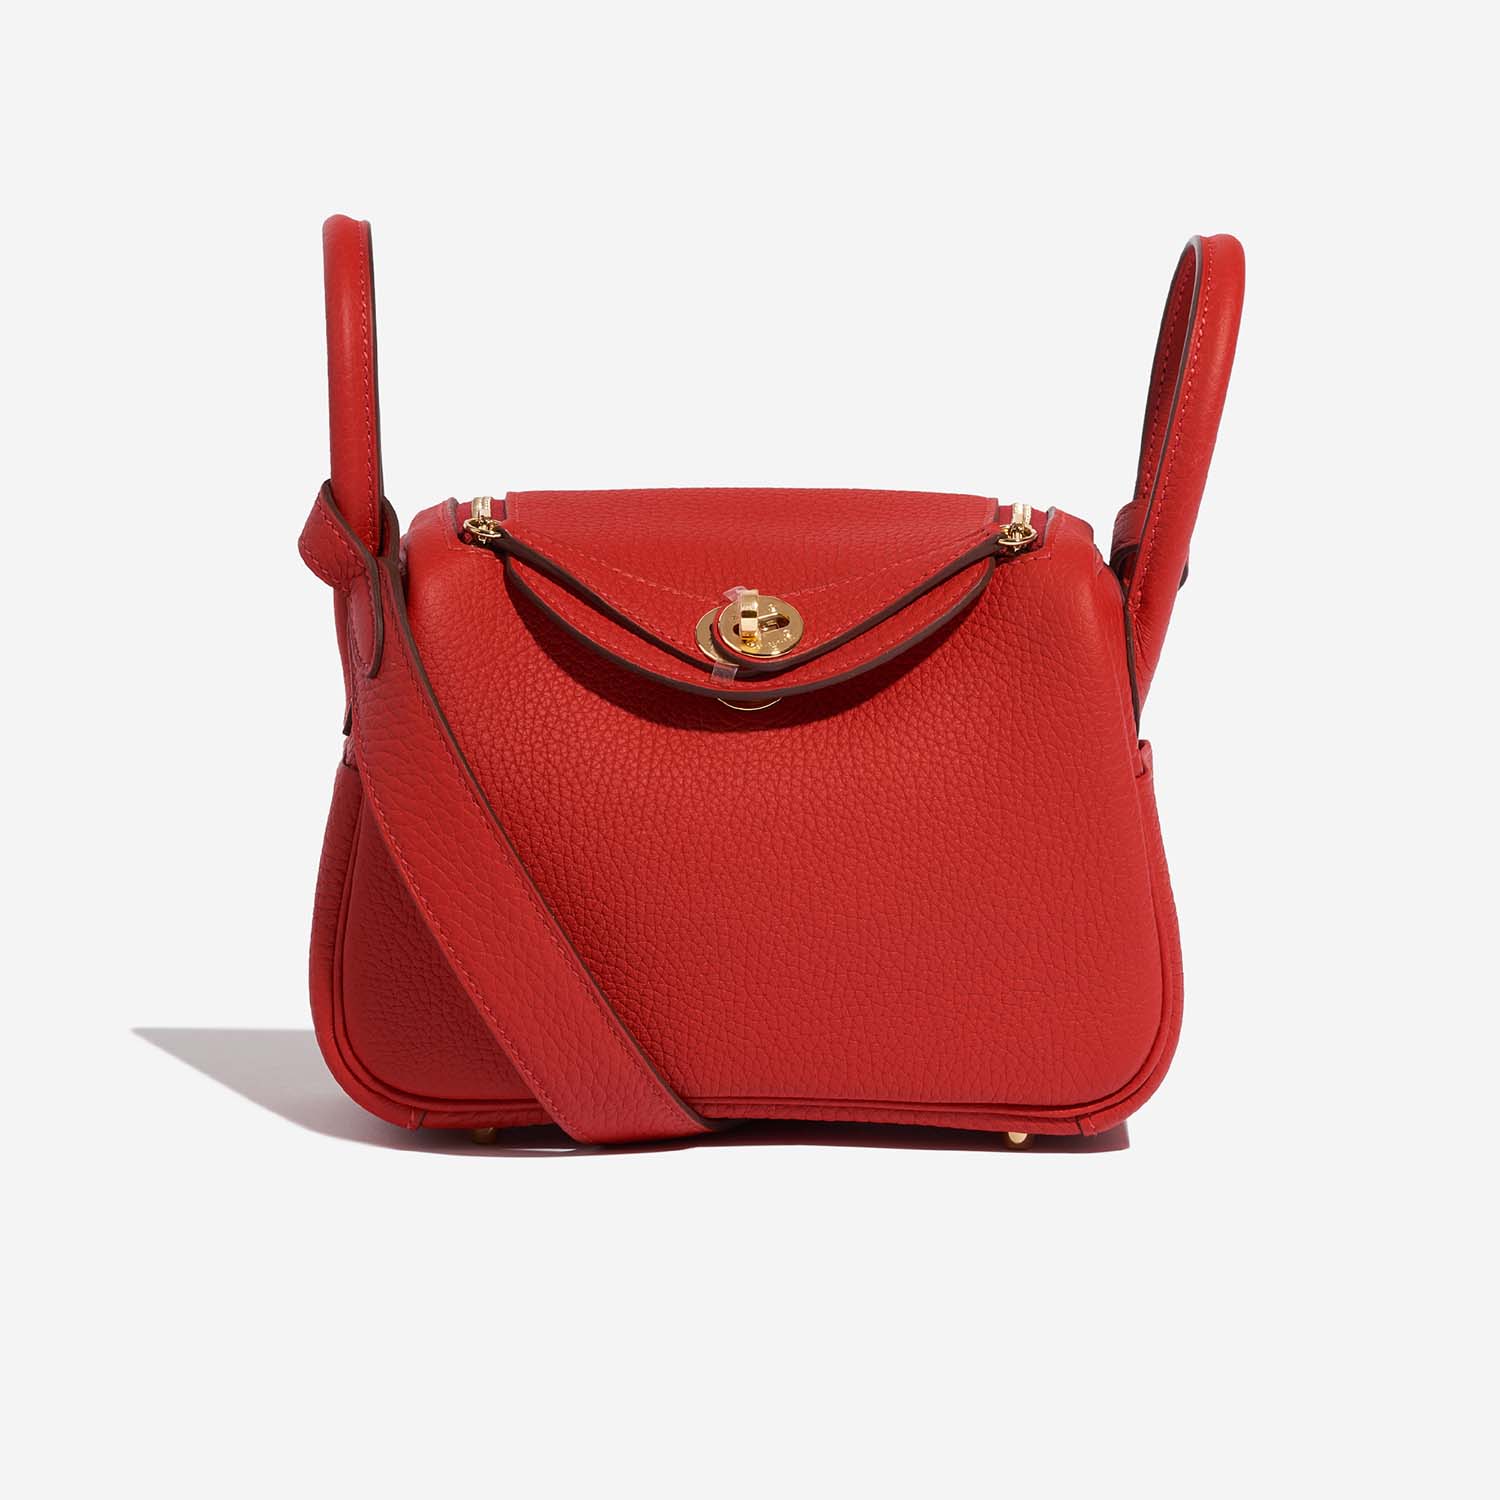 LoVey Goody - 🤤 The Most Wanted! Brand New Hermes Lindy